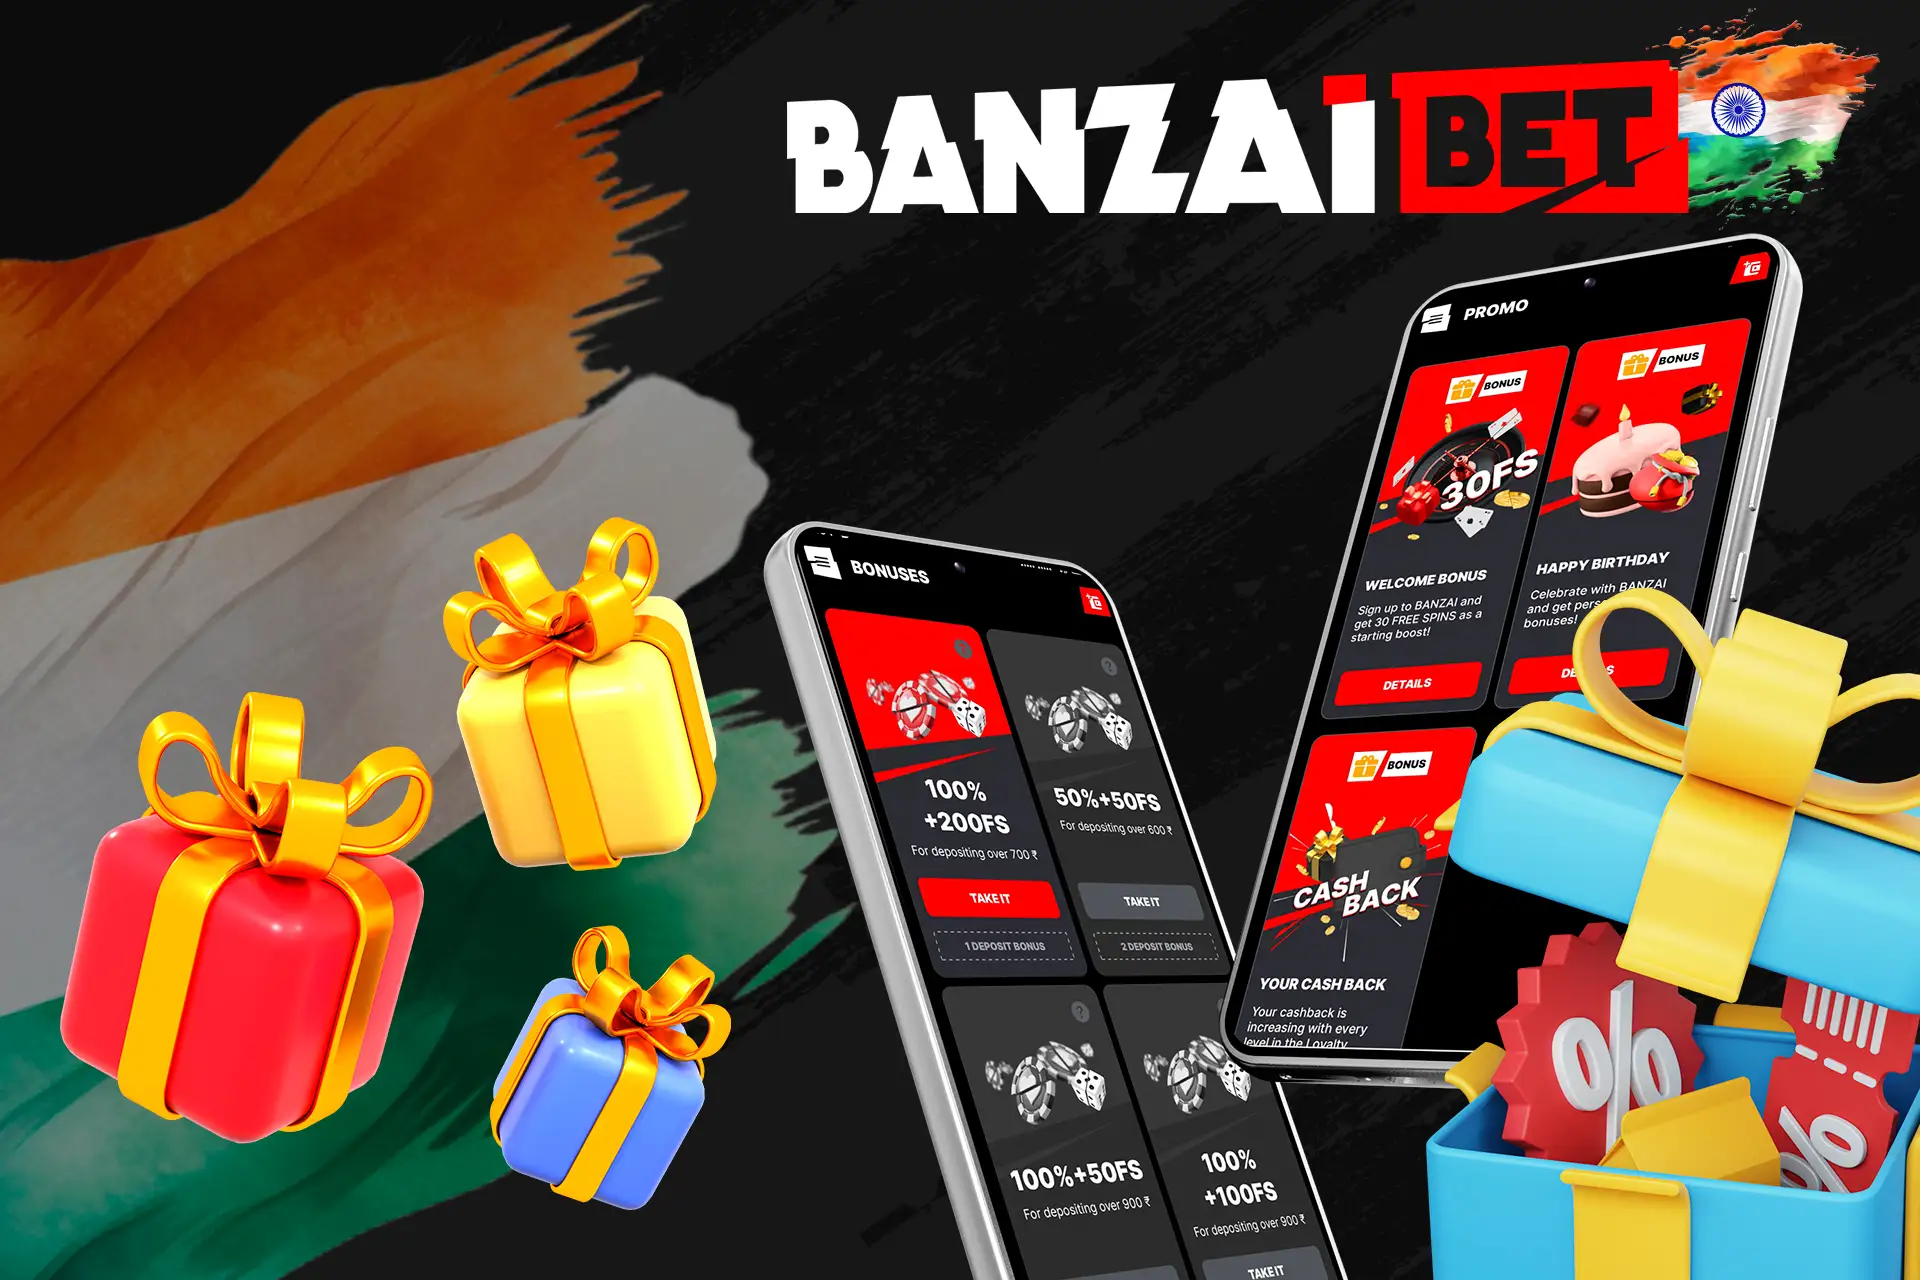 Lots of bonuses are waiting for you in Banzaibet App India